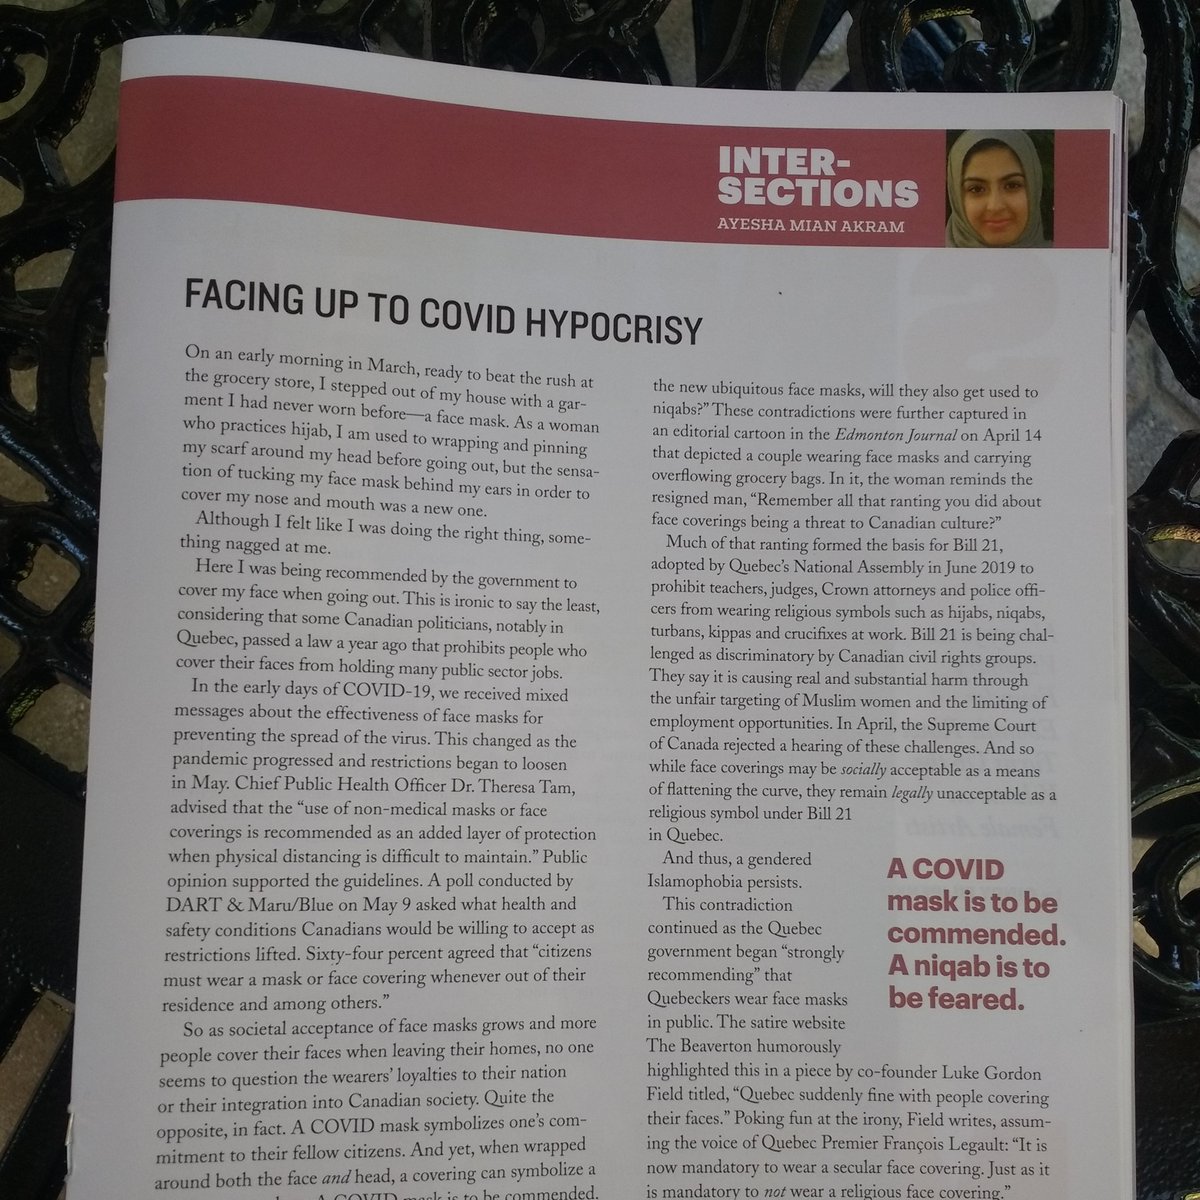 'While face coverings may be socially acceptable as a means of flattening the curve, they remain legally unacceptable as a religious symbol under Bill 21 in Quebec.' Fantastic piece about gendered Islamophobia in Canada by Ayesha Mian Akram in @Herizons_Mag